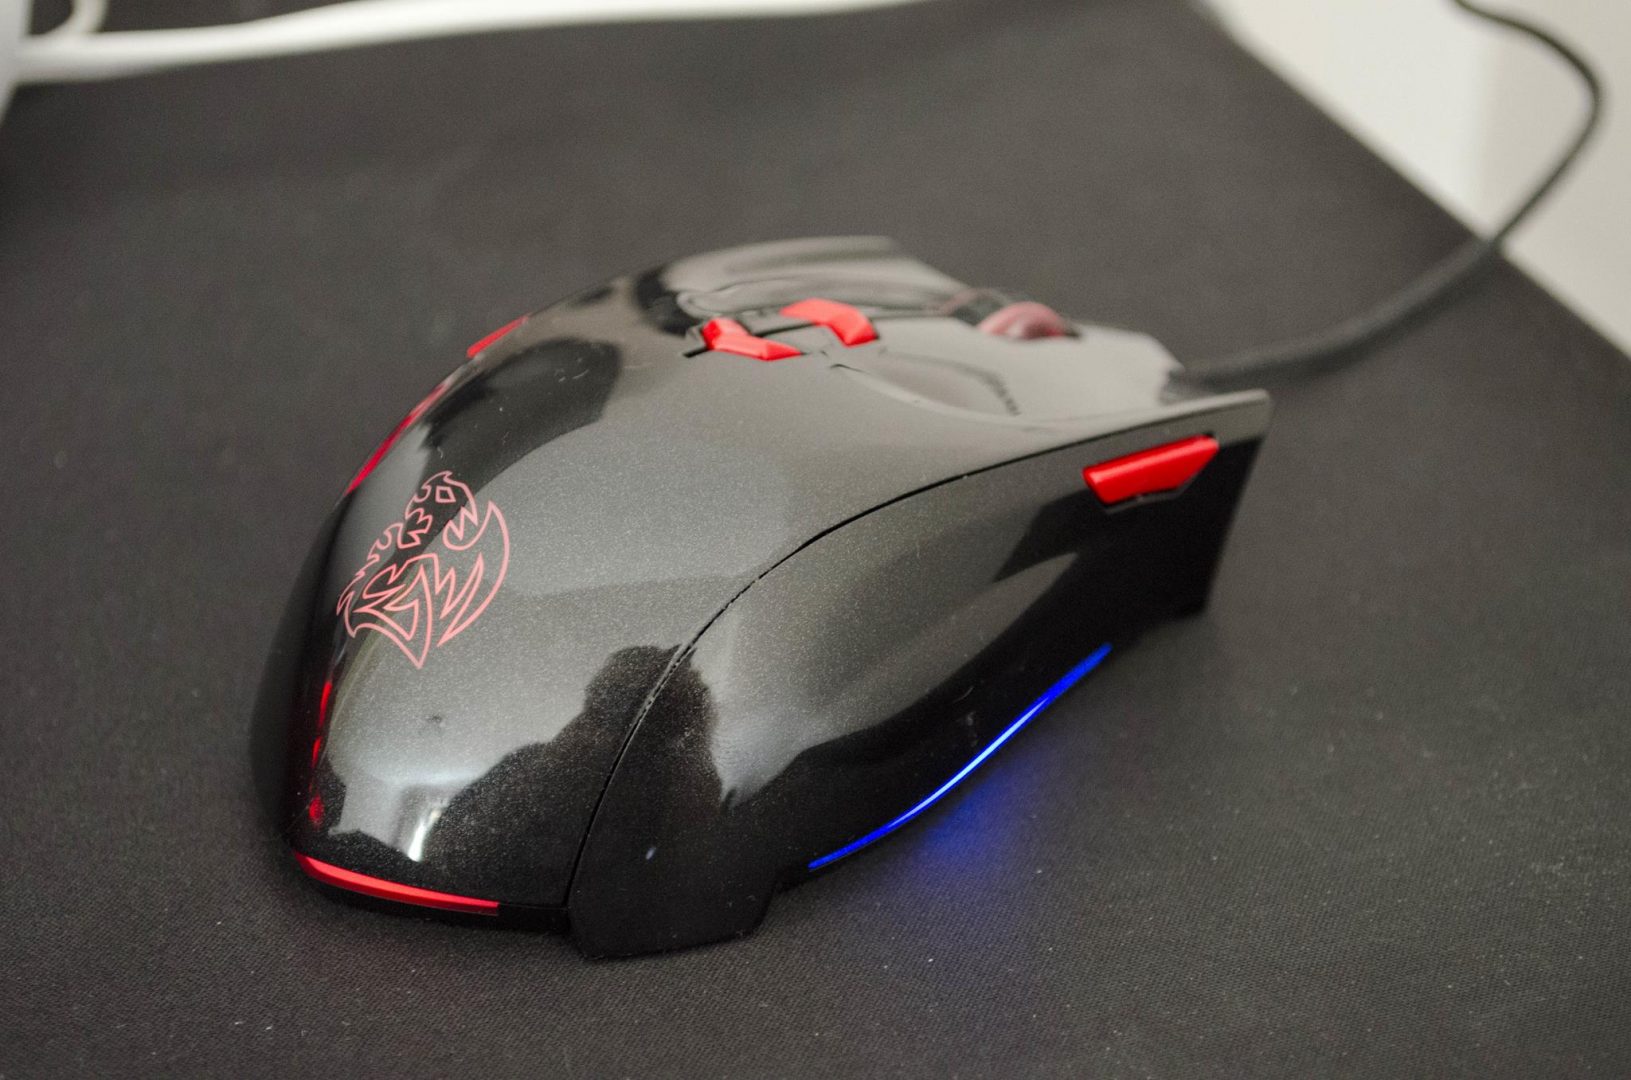 Tt eSPORTs Theron Plus Smart Mouse Review_1